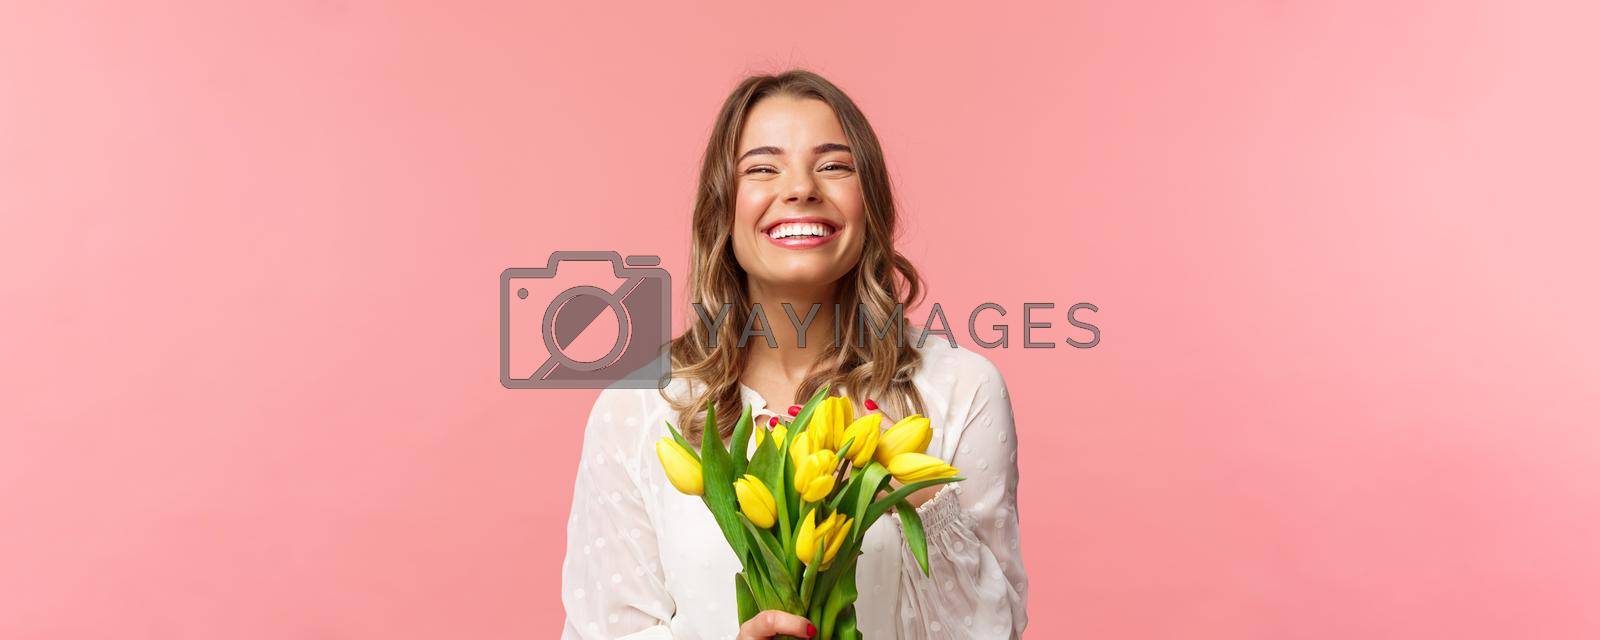 Spring, happiness and celebration concept. Close-up of happy and carefree blond european girl receive beautiful bouquet of flowers, holding yellow tulips, smiling and laughing, pink background.